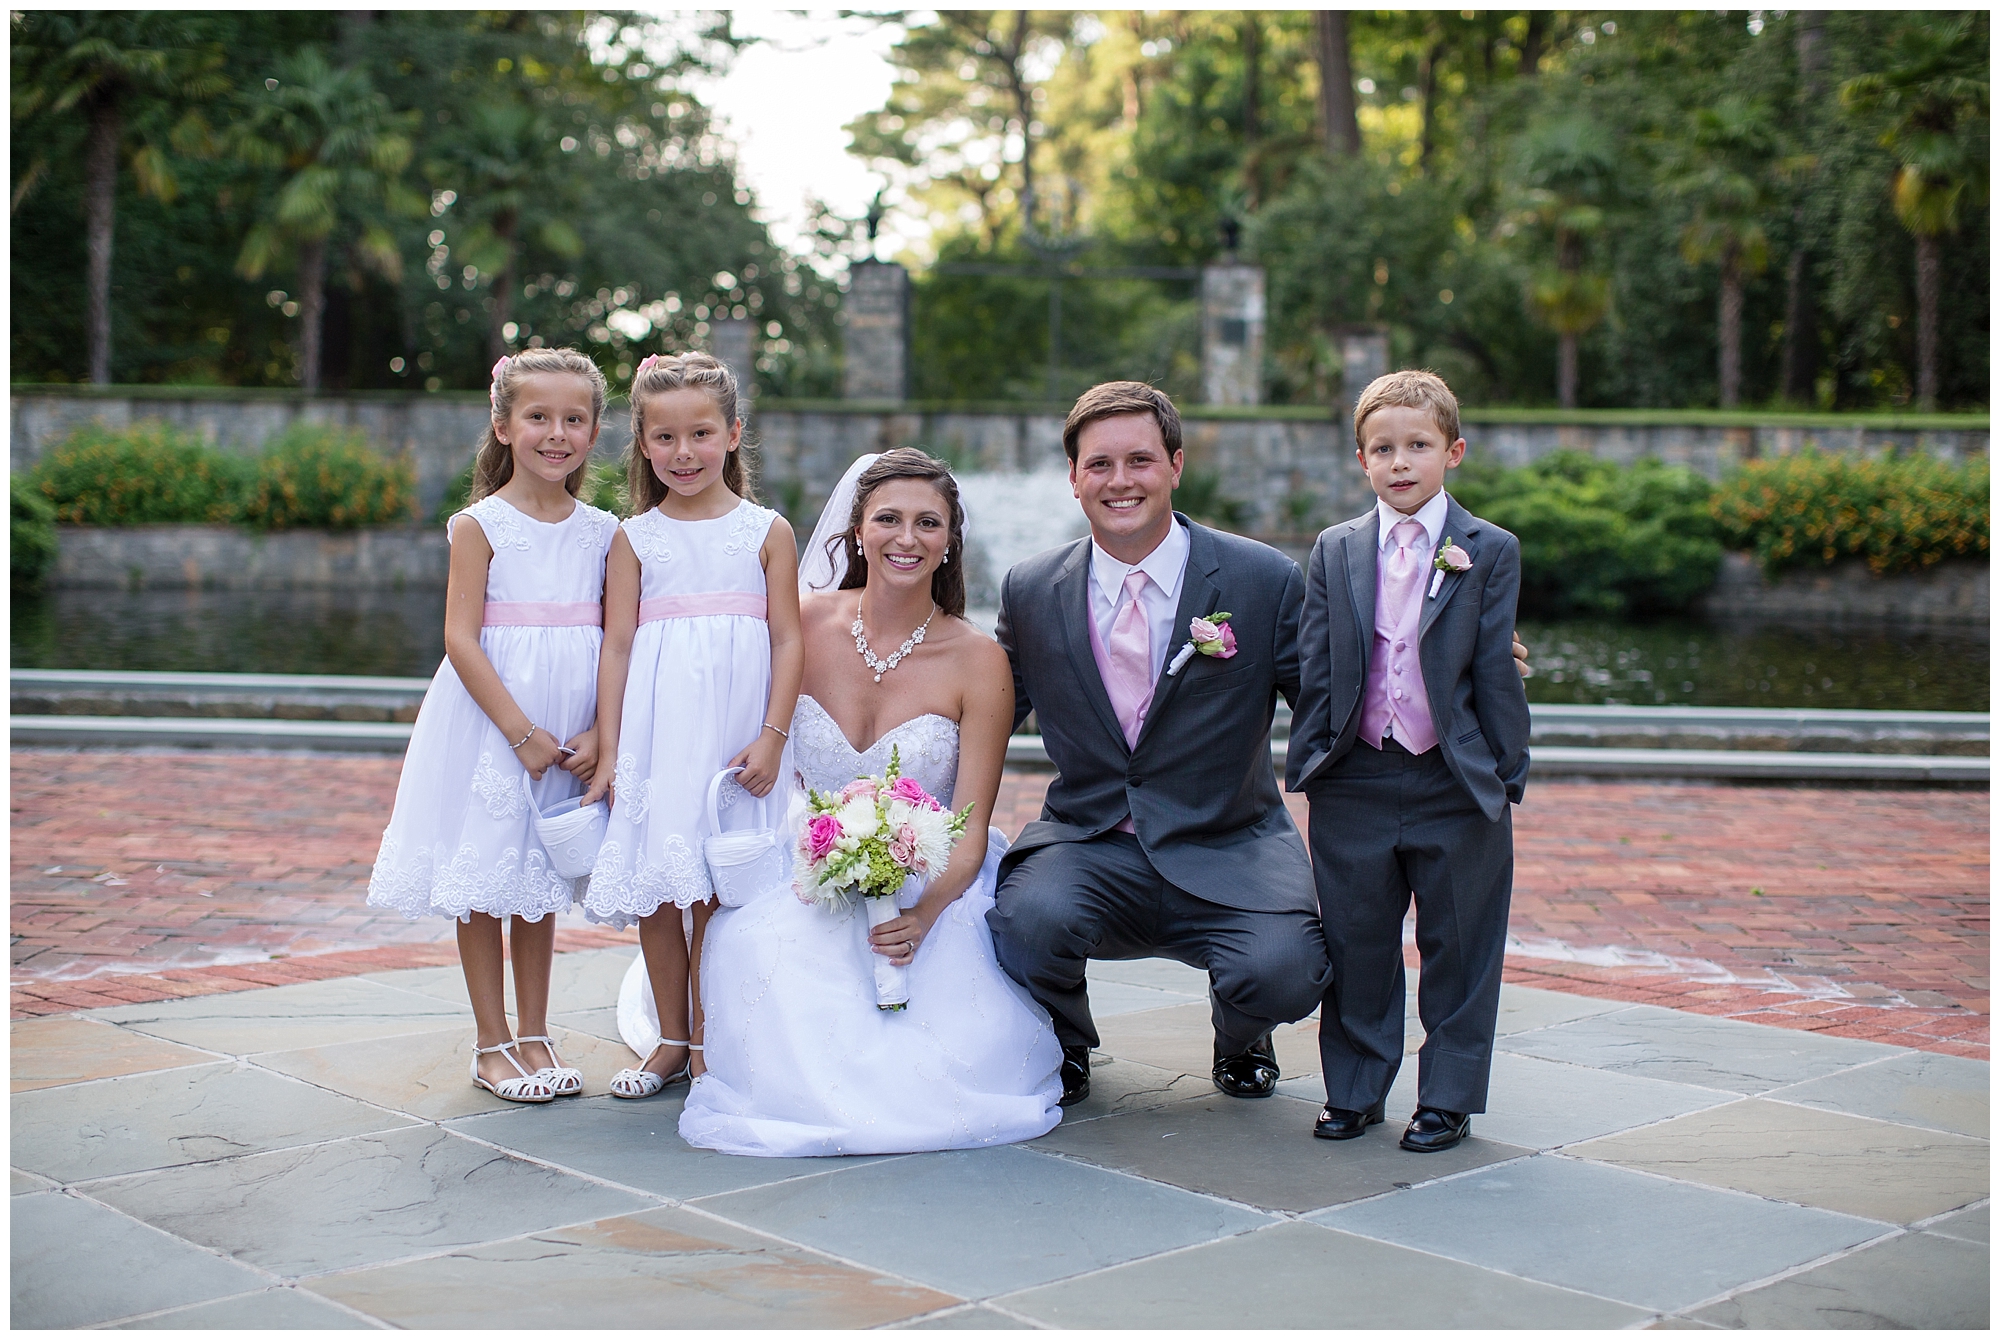 bride and groom with children